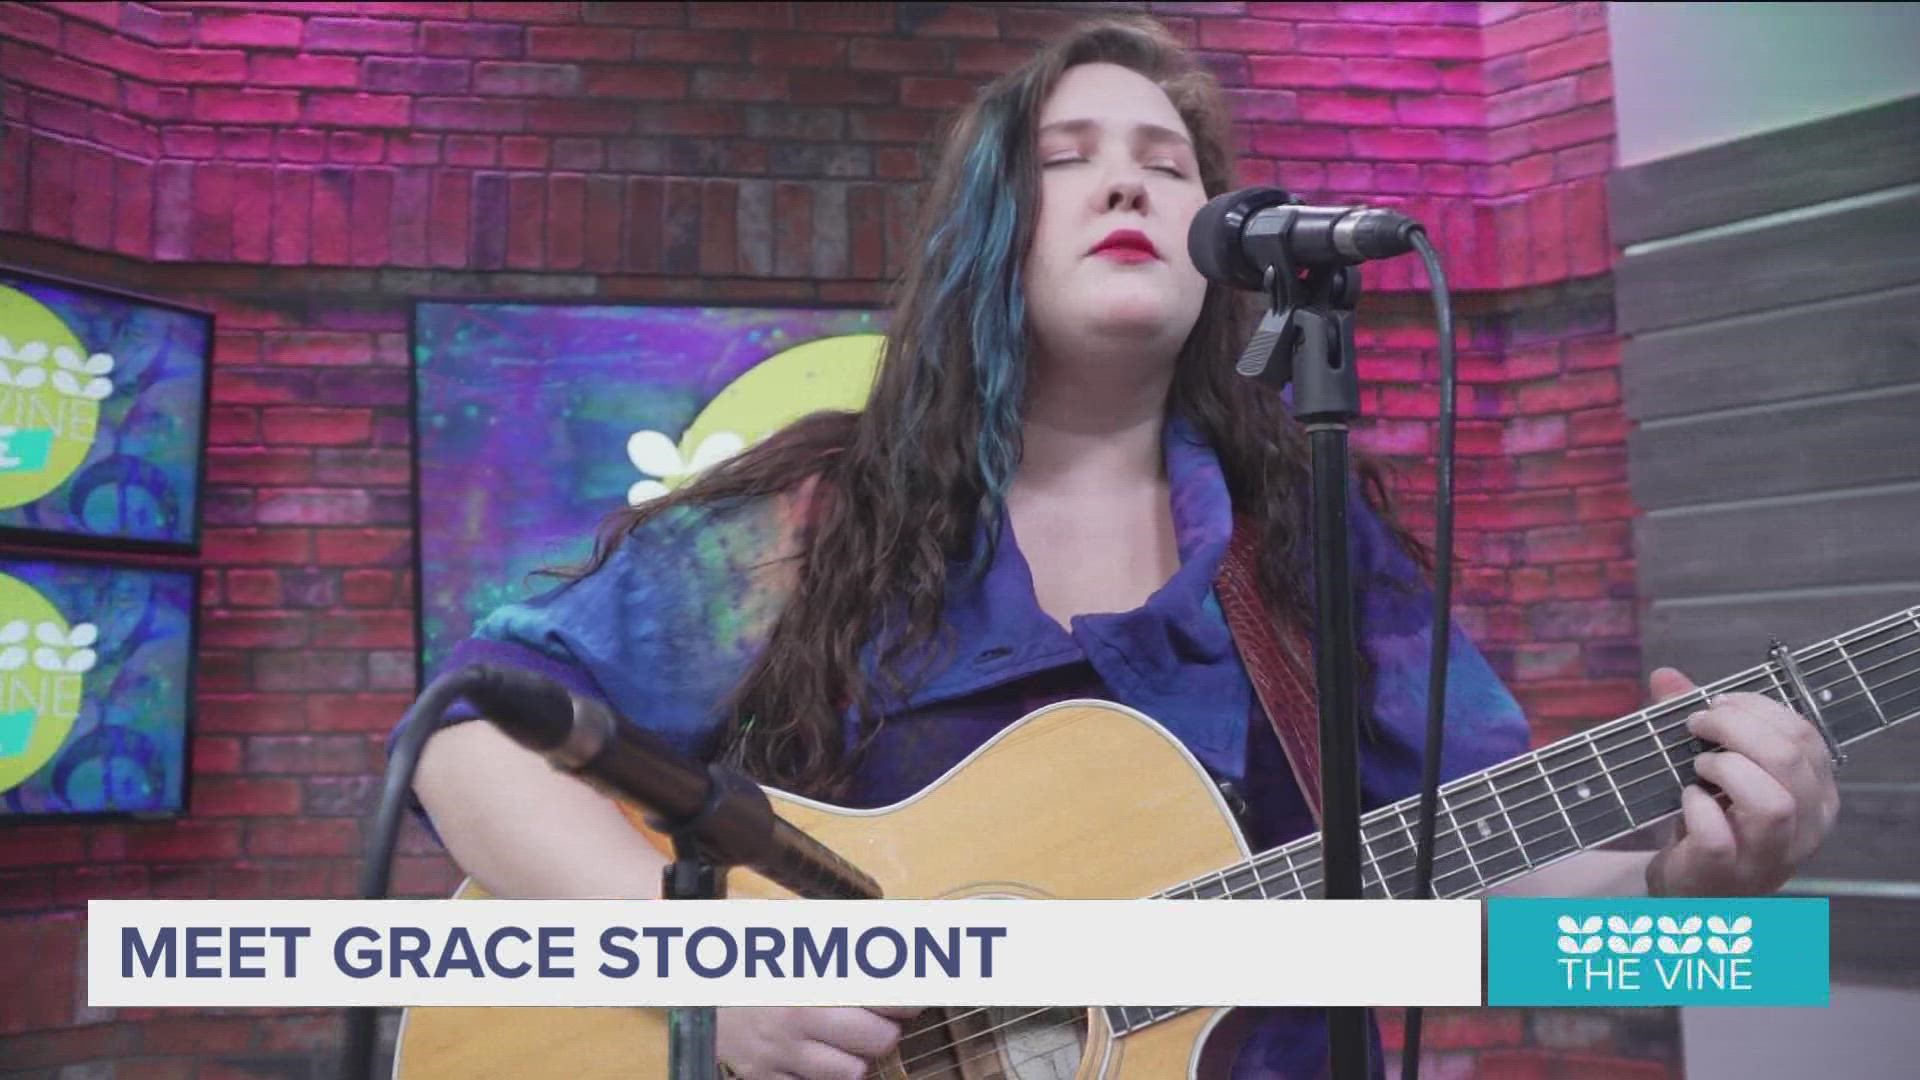 Grace Stormont performs her new song on The Vine